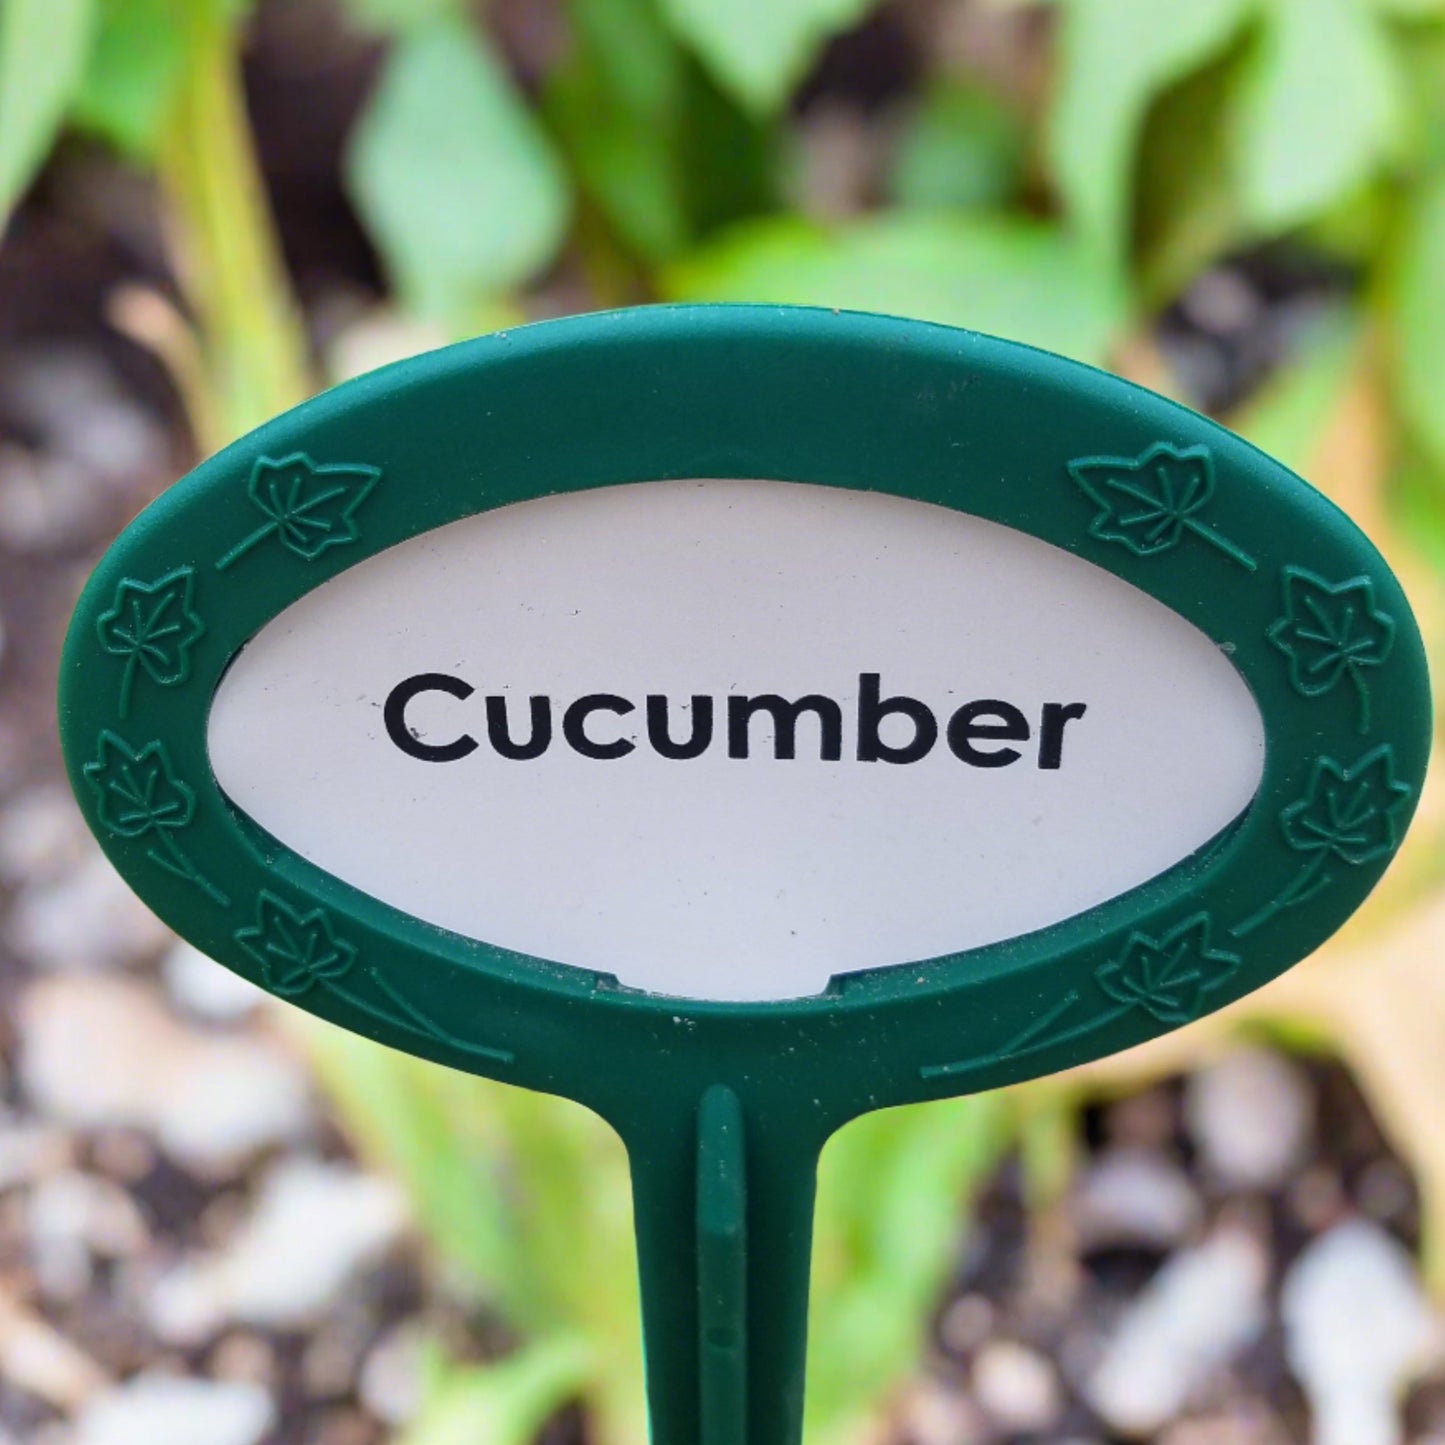 Preprinted garden marker veggie collection 20 pack. long lasting Made in USA. Cucumber